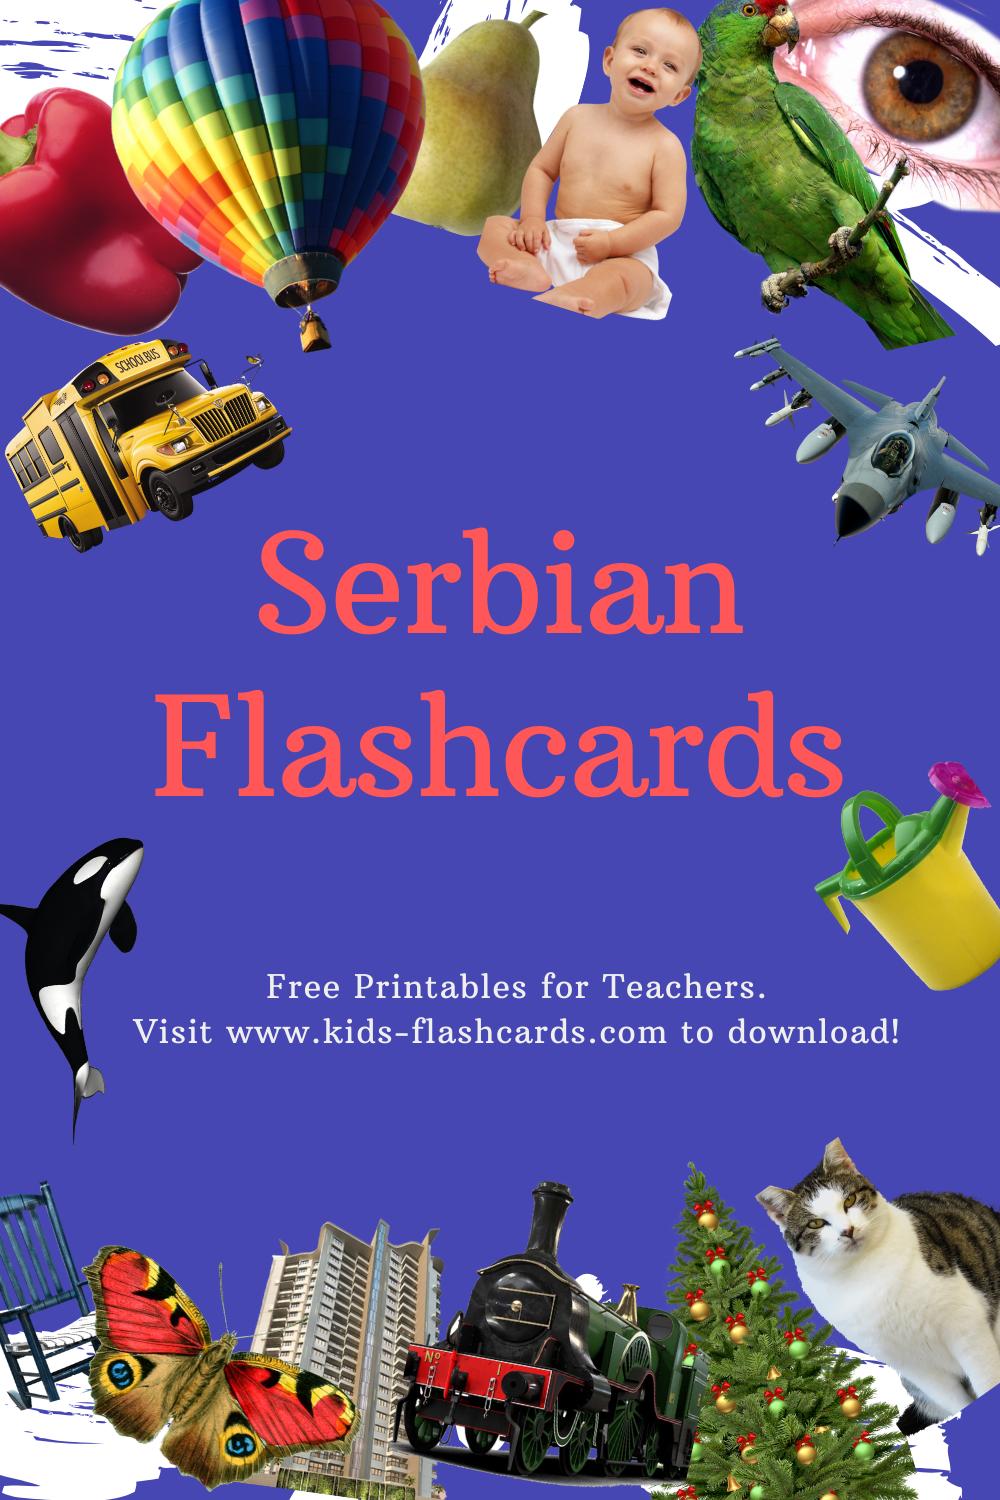 Worksheets to learn Serbian language